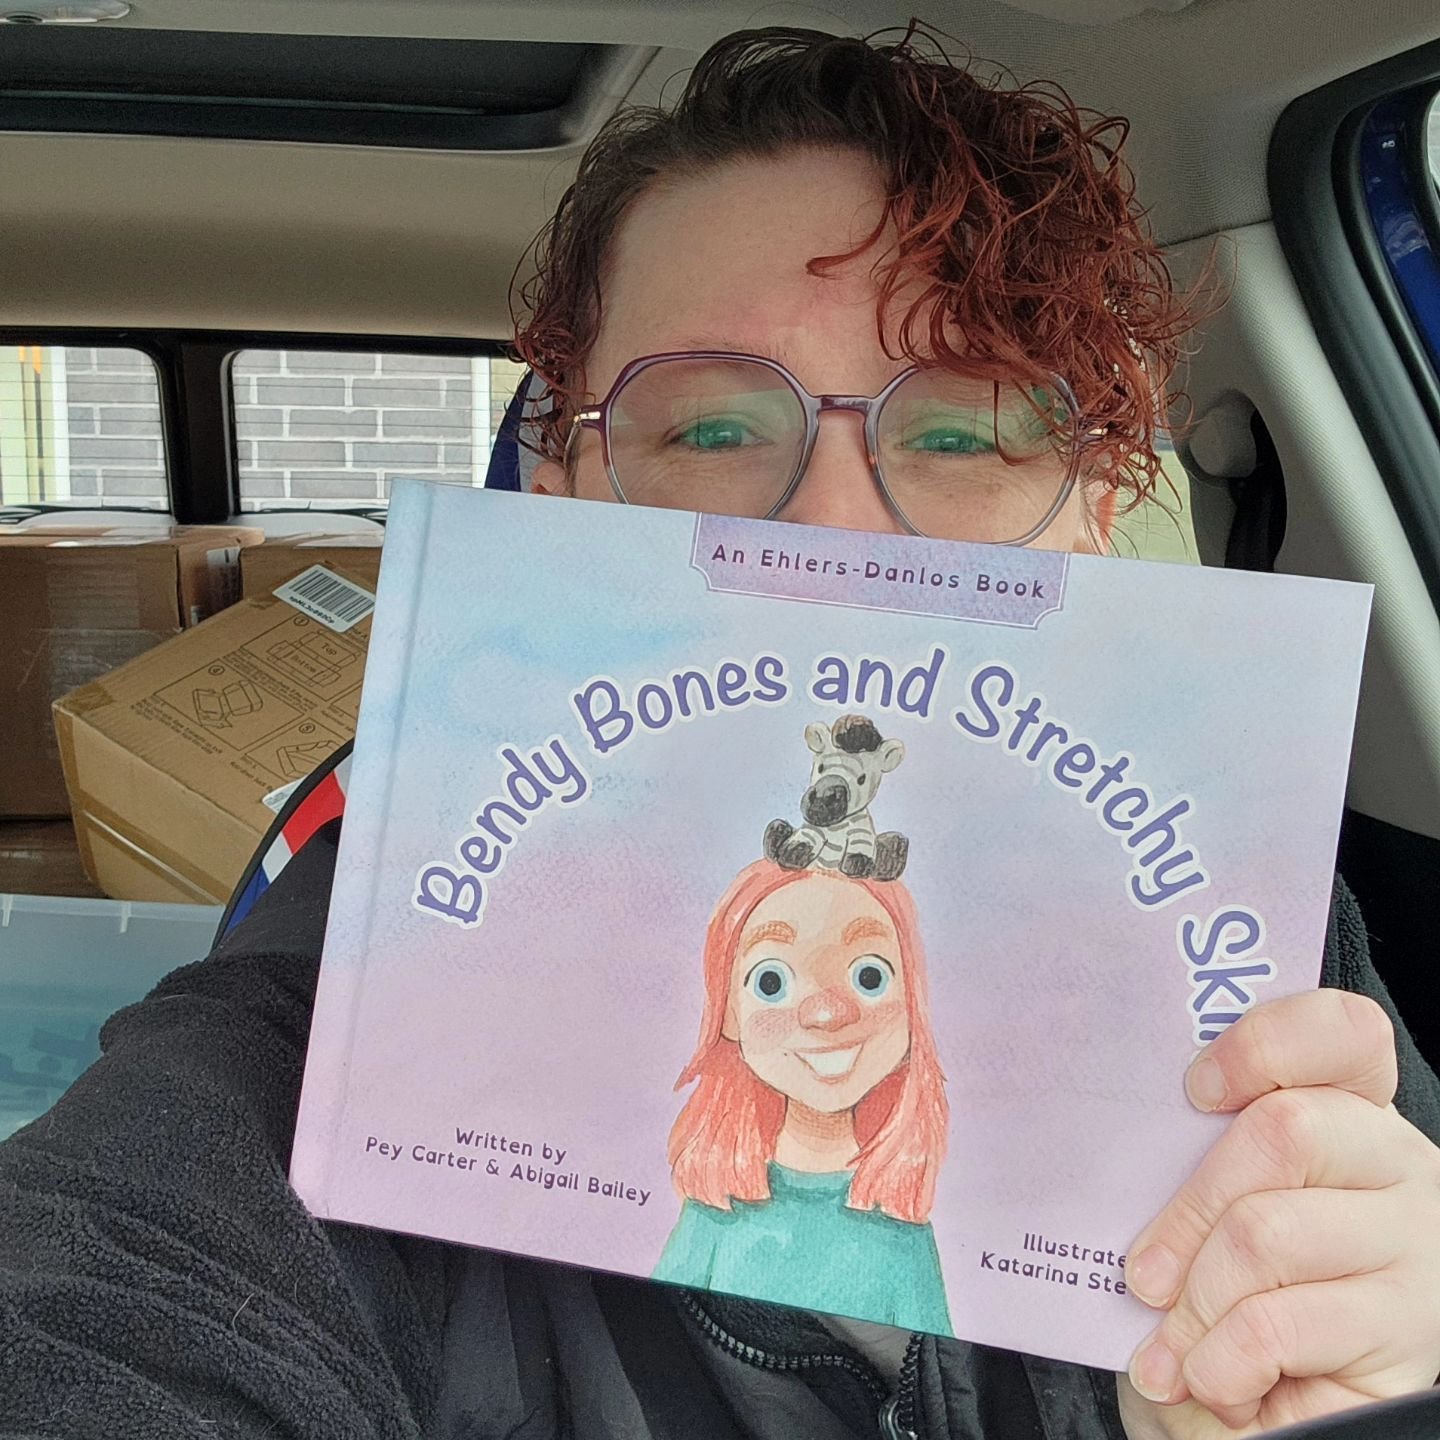 Written by @peycarter and Abigail Bailey and illustrated by Katarina Stevanović, &ldquo;Bendy Bones and Stretchy Skin&rdquo; explores what it means to live with Ehlers-Danlos syndrome. The book is now available at your favorite indie bookstore or whe